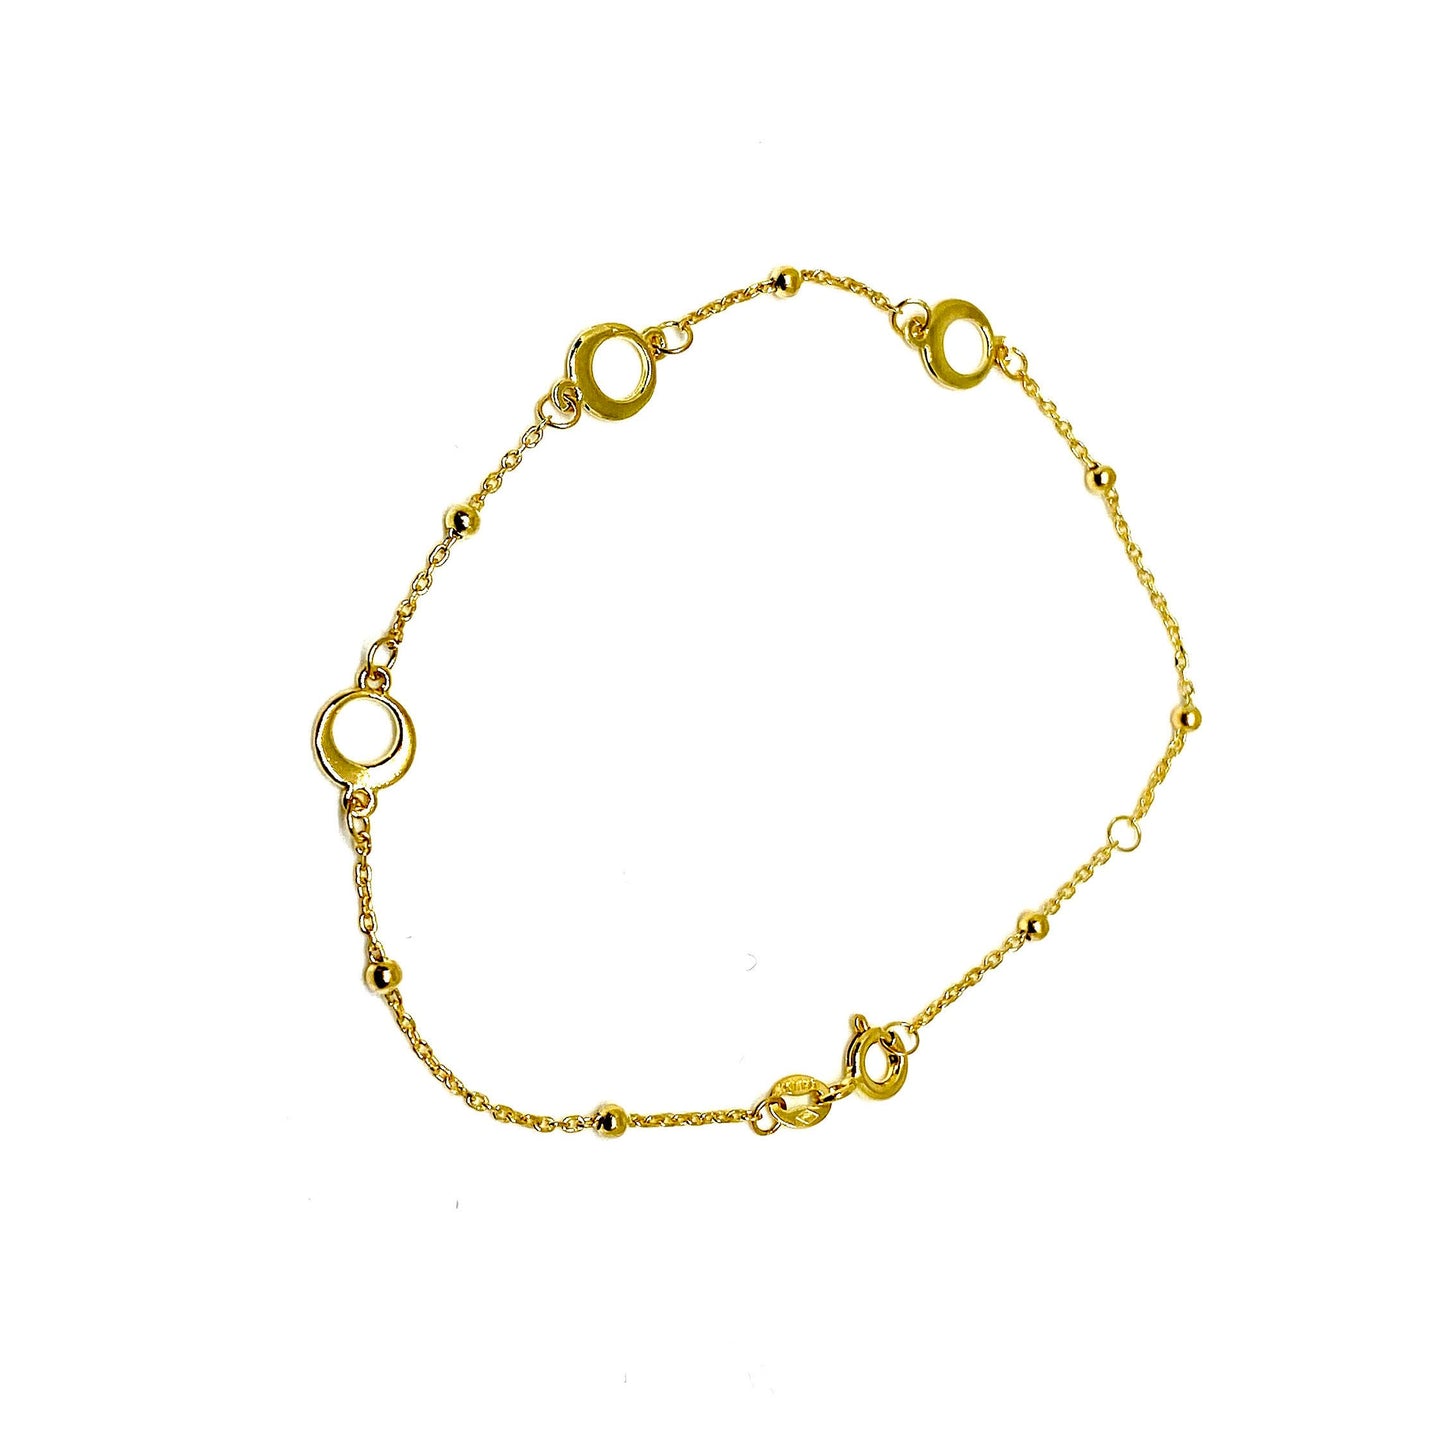 Yellow Gold Circles & Beads Station Adjustable Chain Bracelet